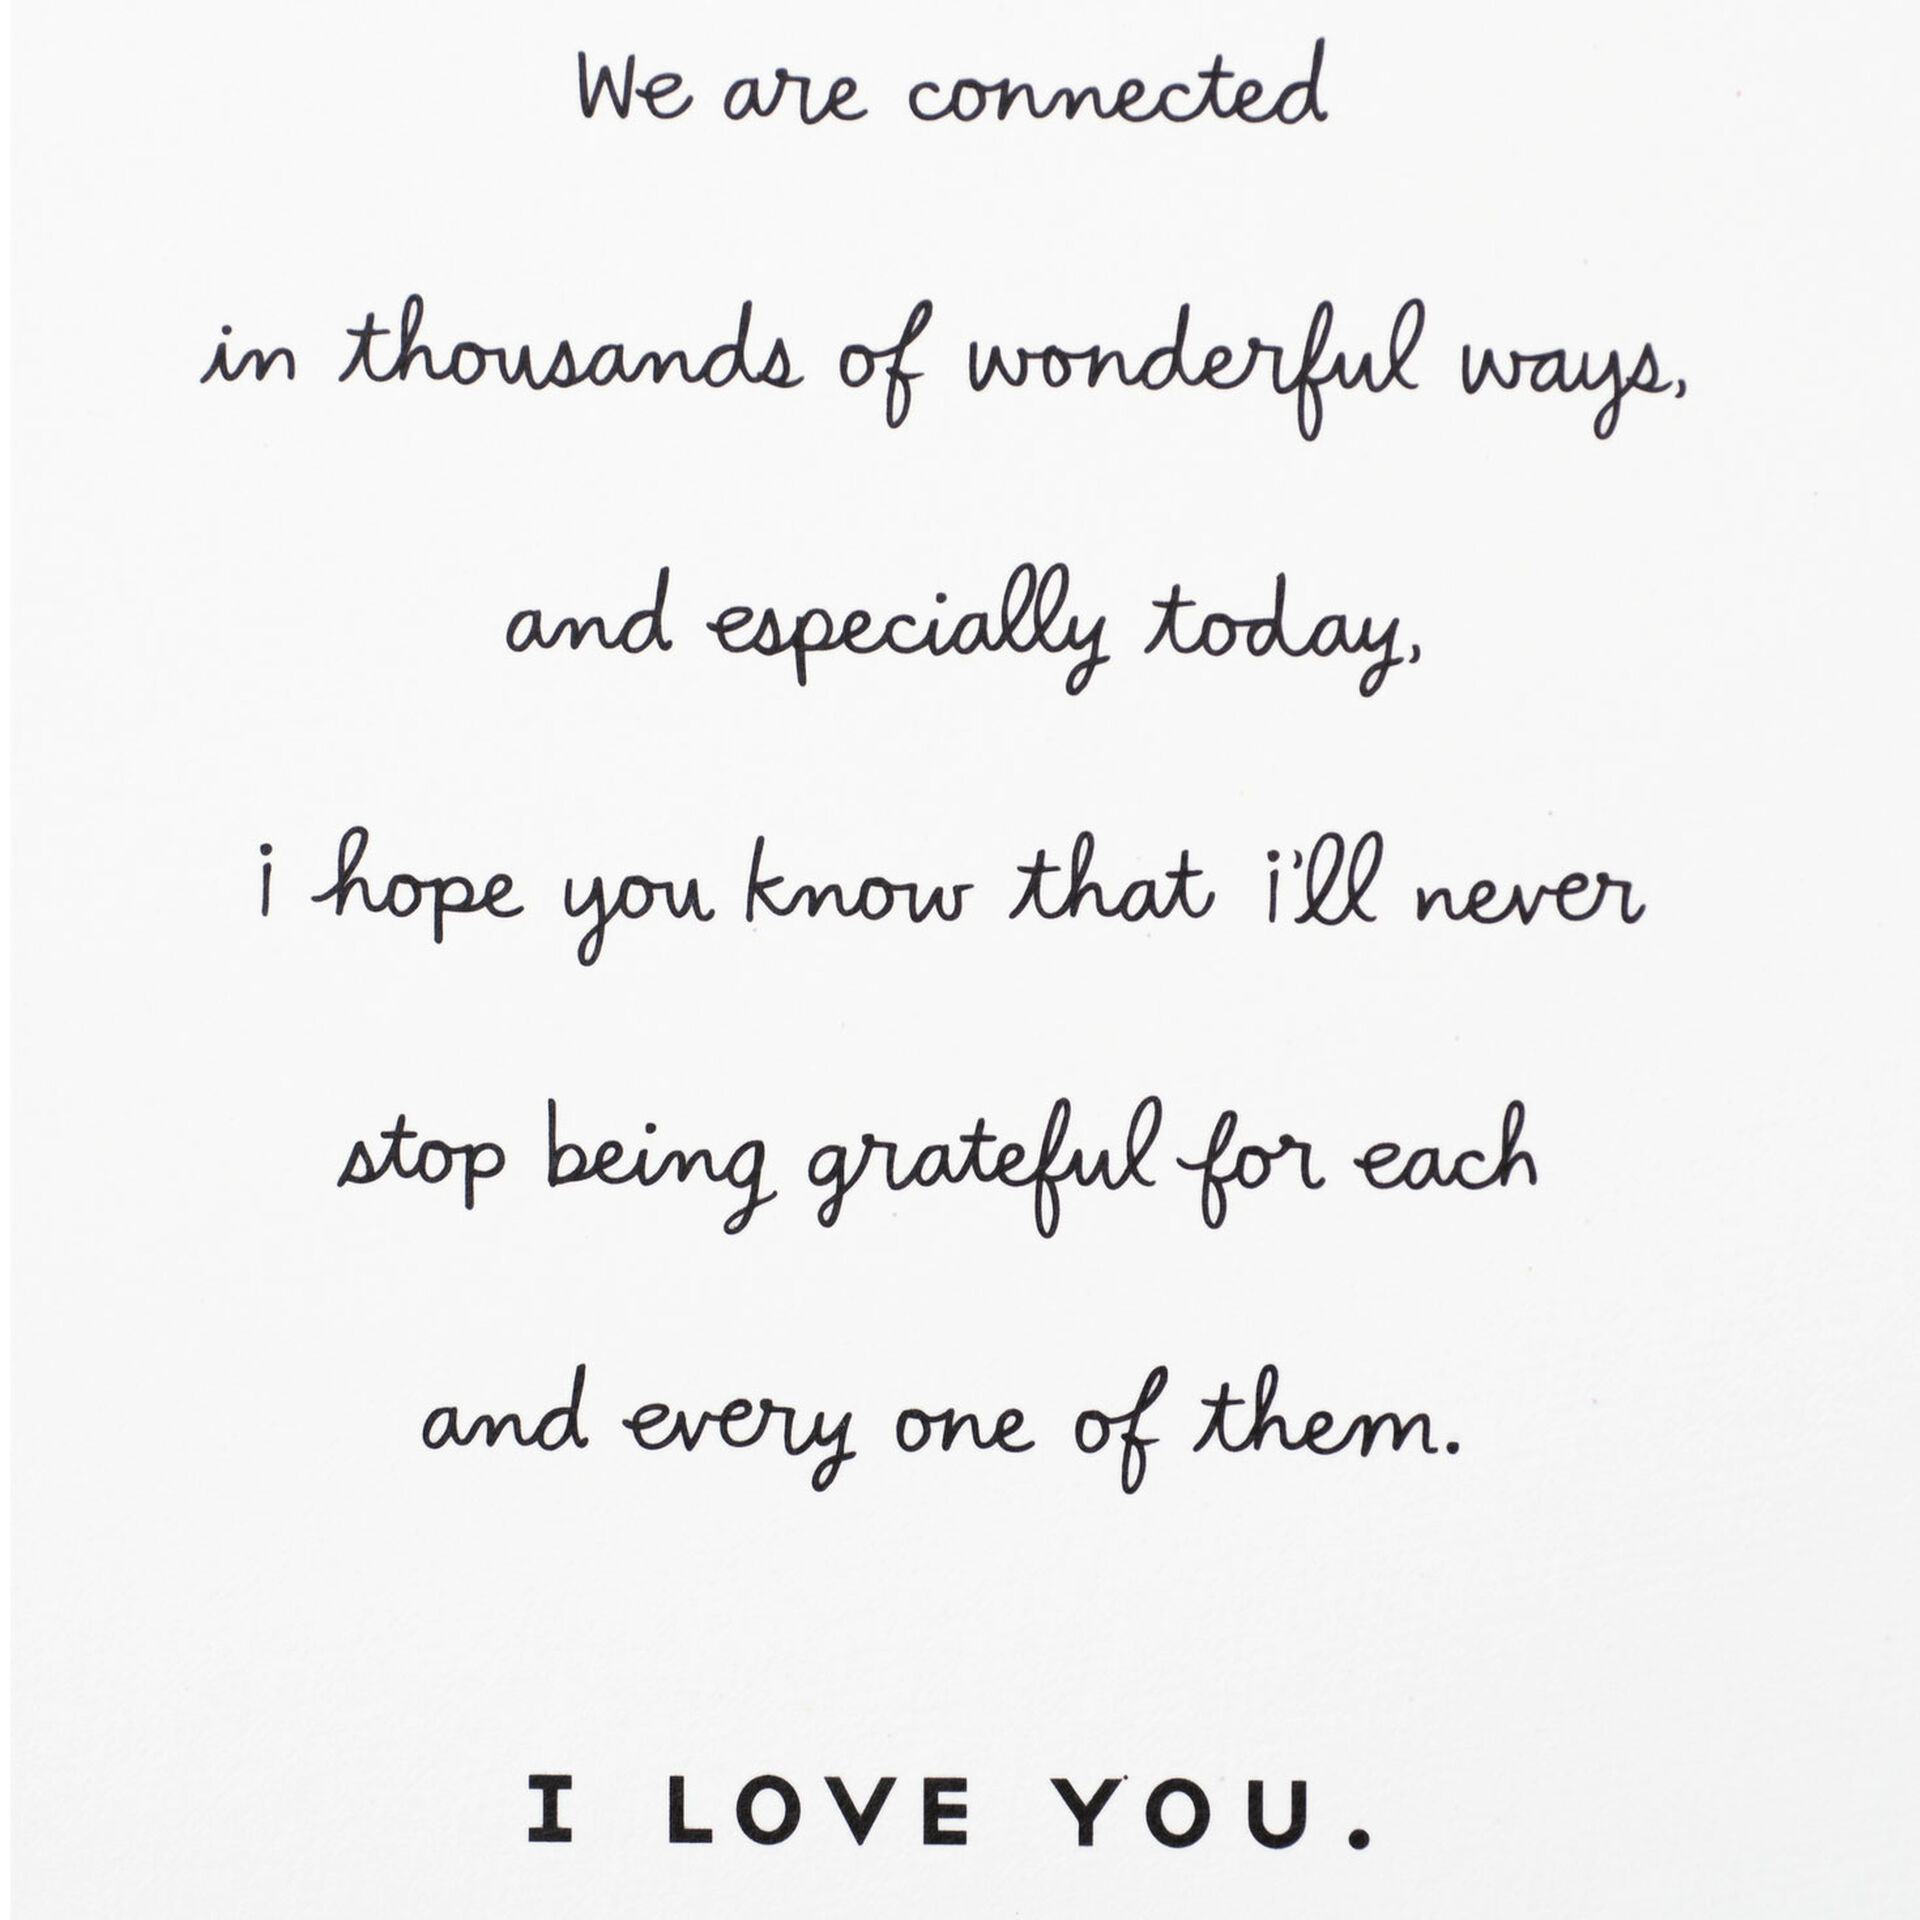 Connected-Wonderful-Anniversary-Card_499MHF8116_03